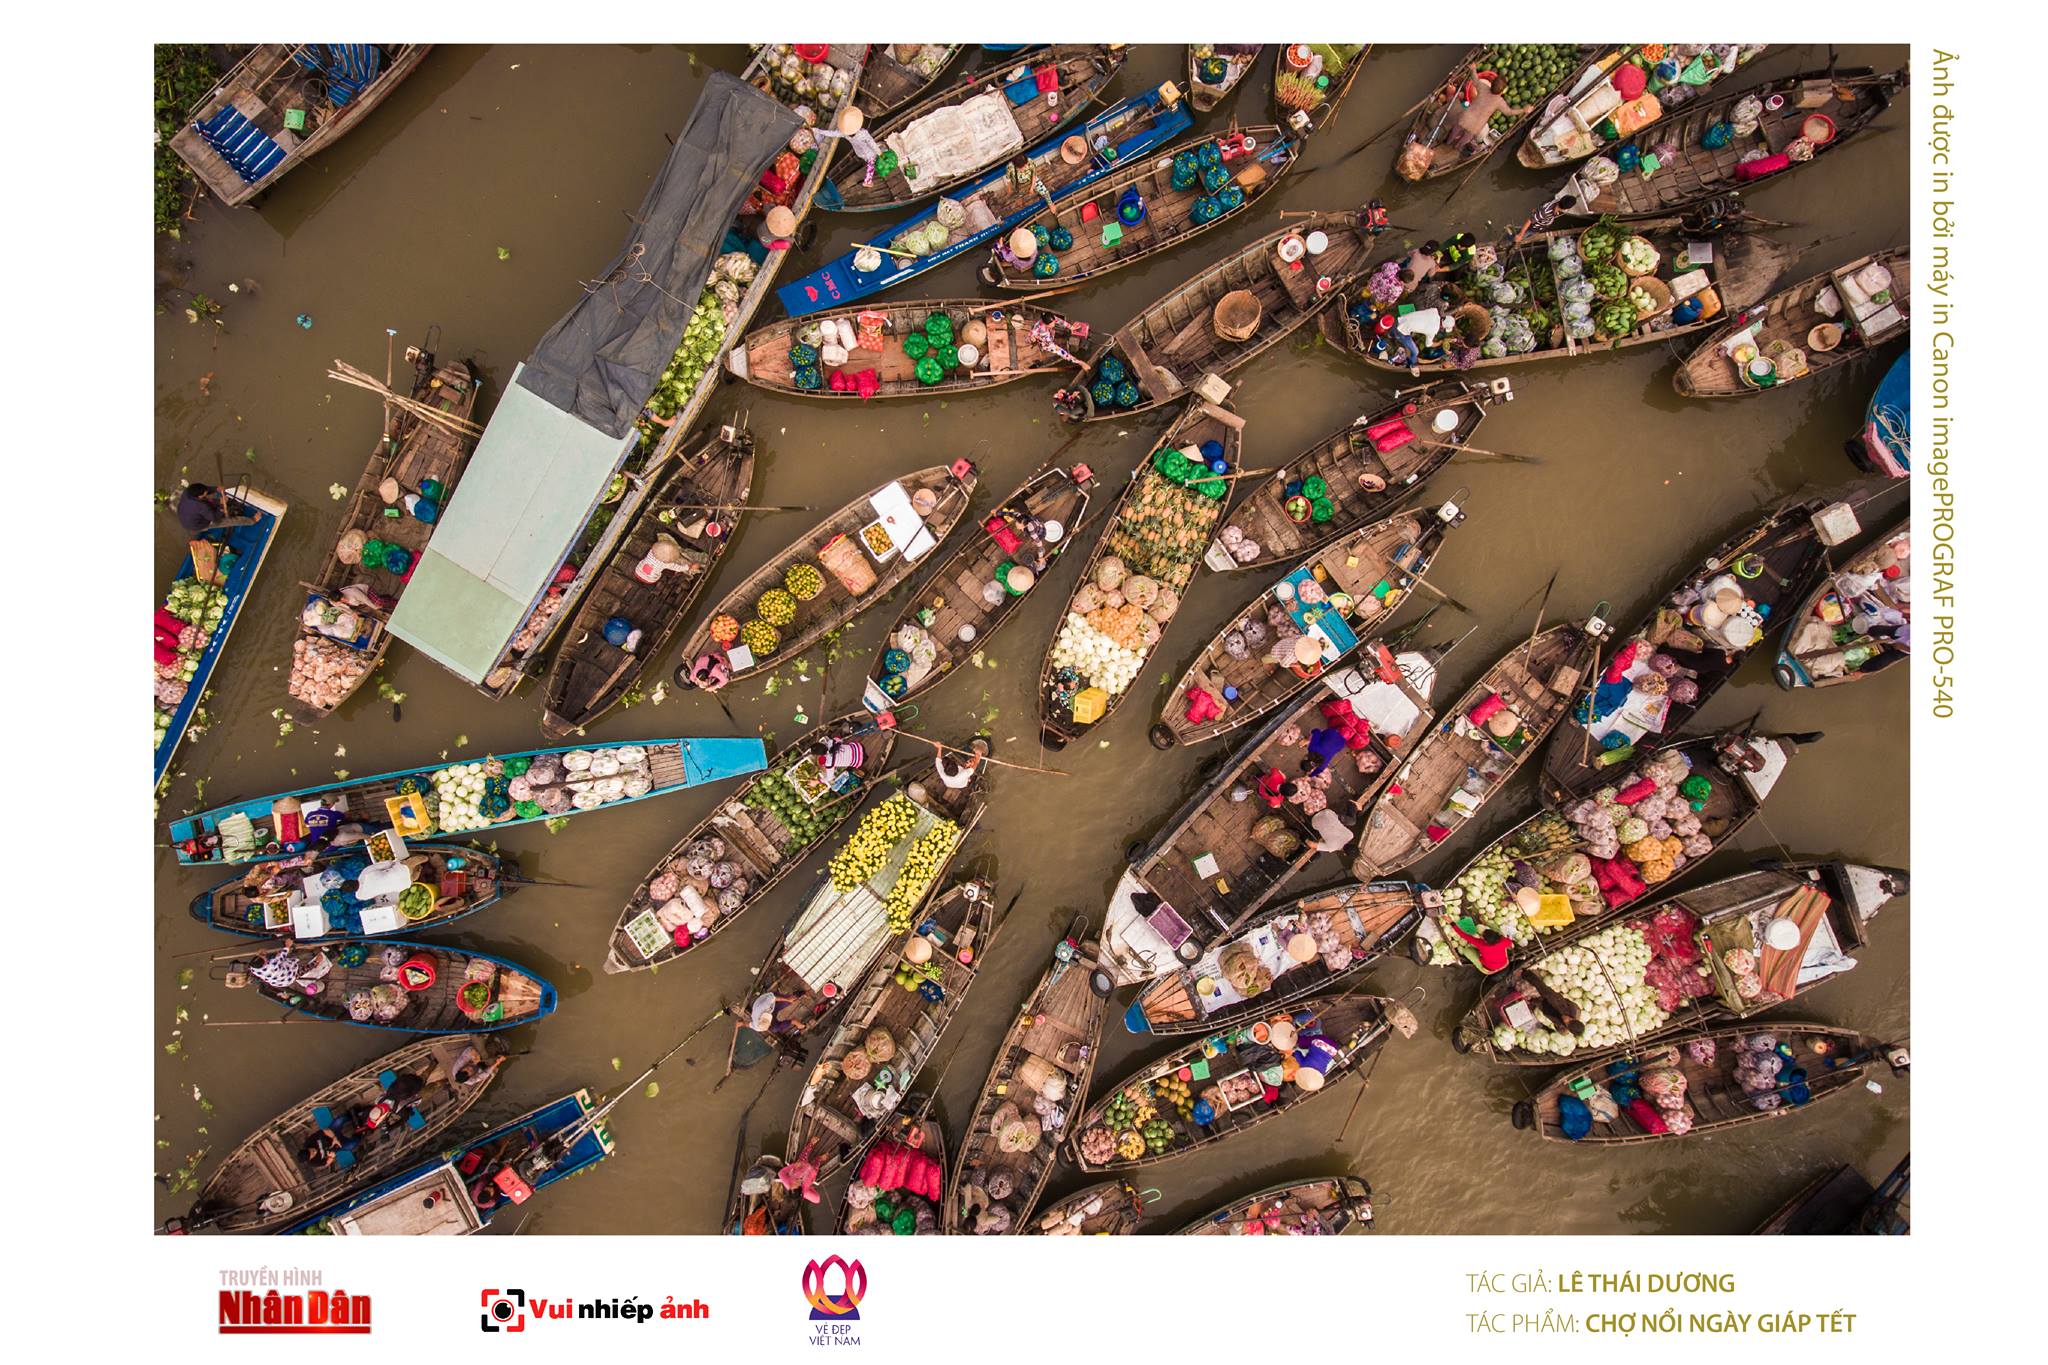 A flycam shot captures an iconic floating market in Vietnam's Mekong Delta on Tet holiday